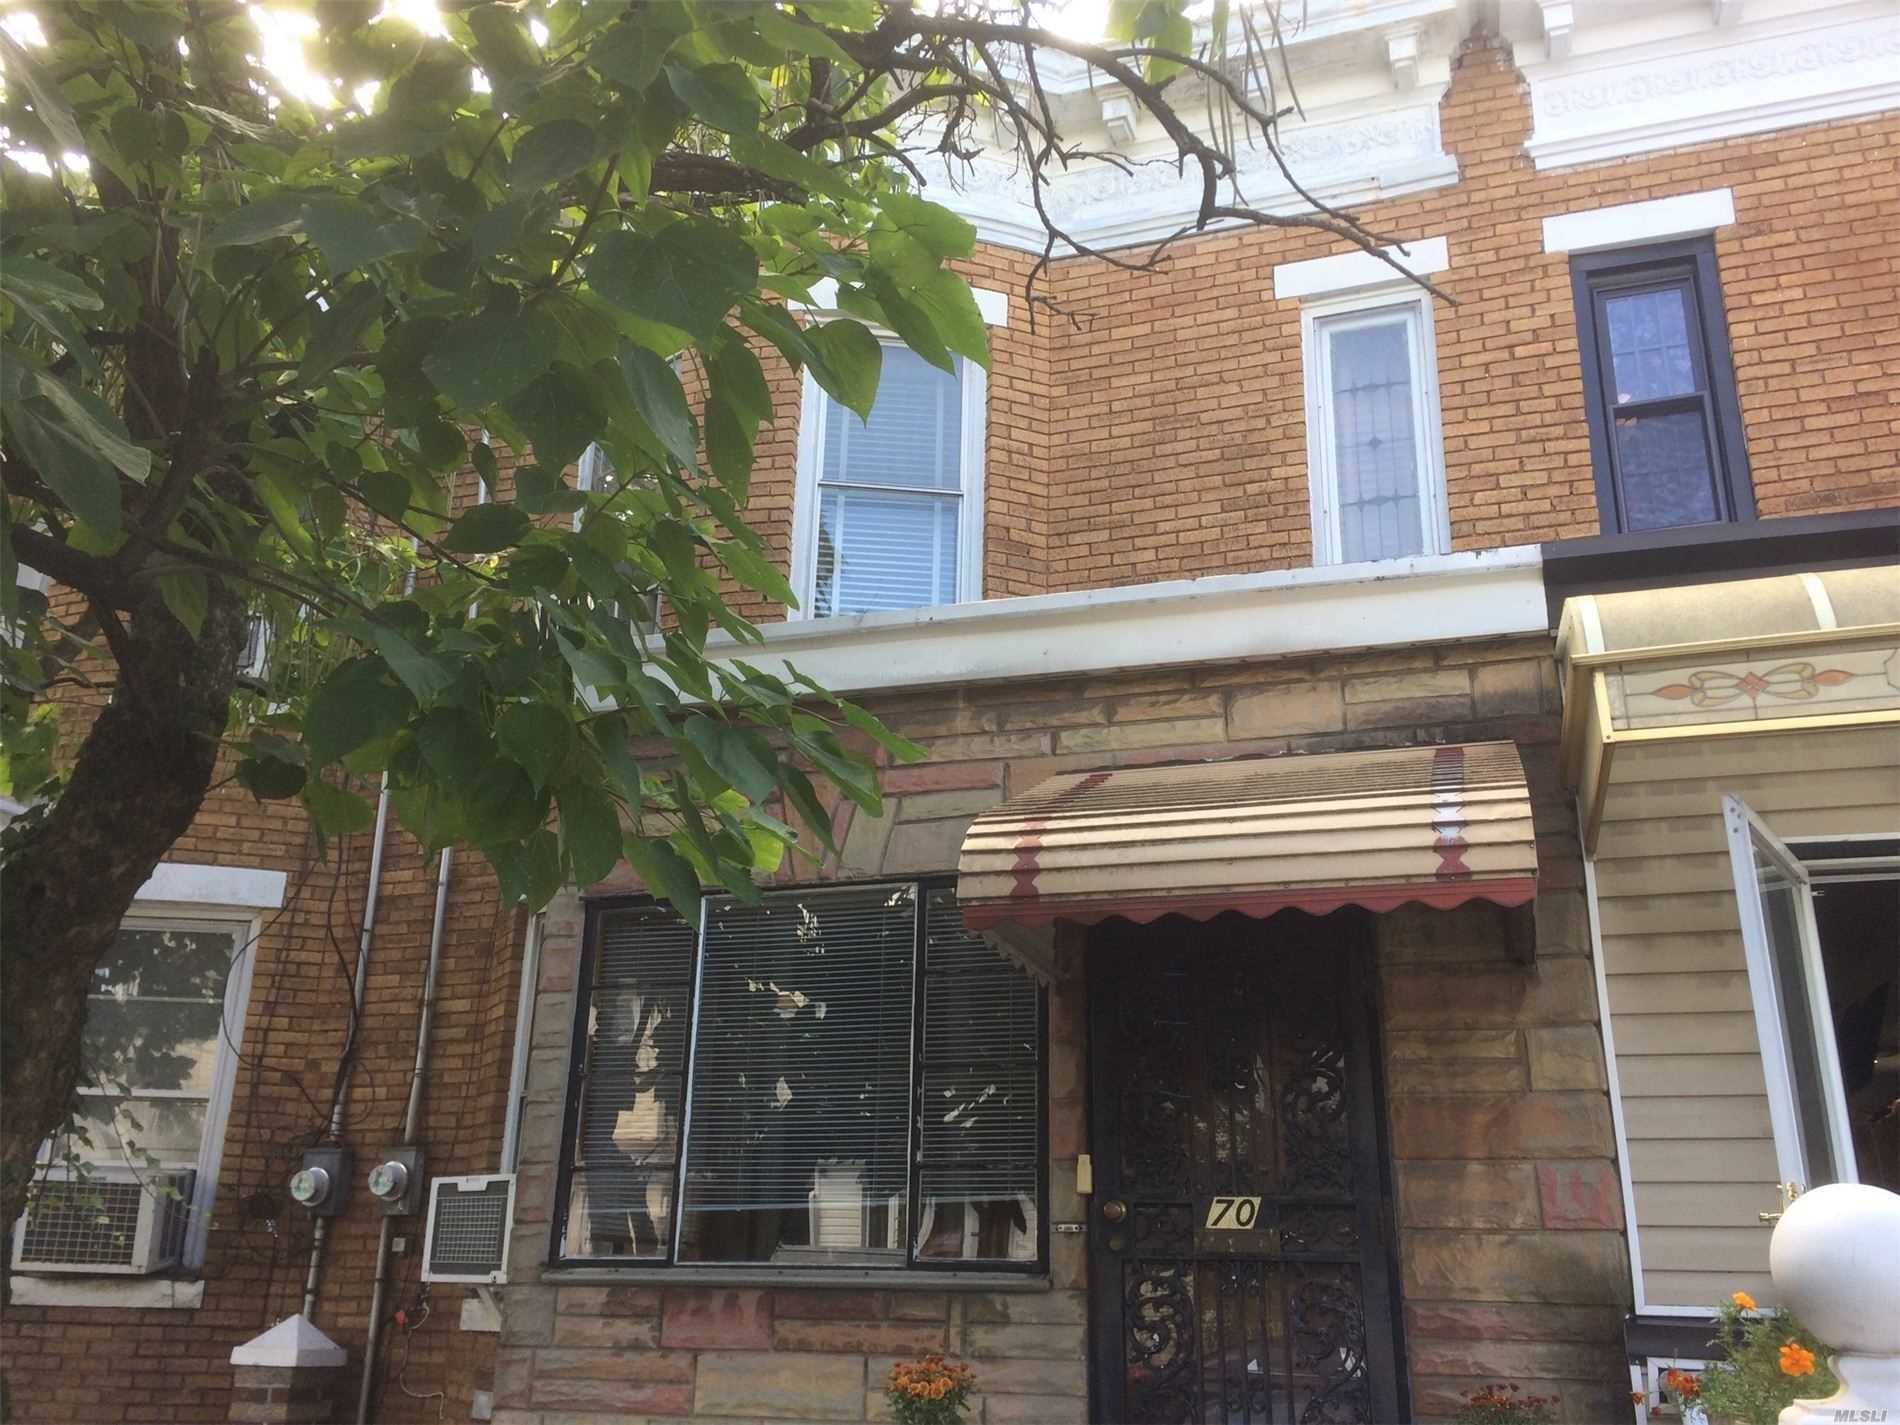 Brooklyn ; City Line Attached Brick One Family ; 3 Bedrooms, Needs Updates ; Formal Living Roomand Dining Room ; Full basement ; Gas Heat ; Close to Shopping and ...